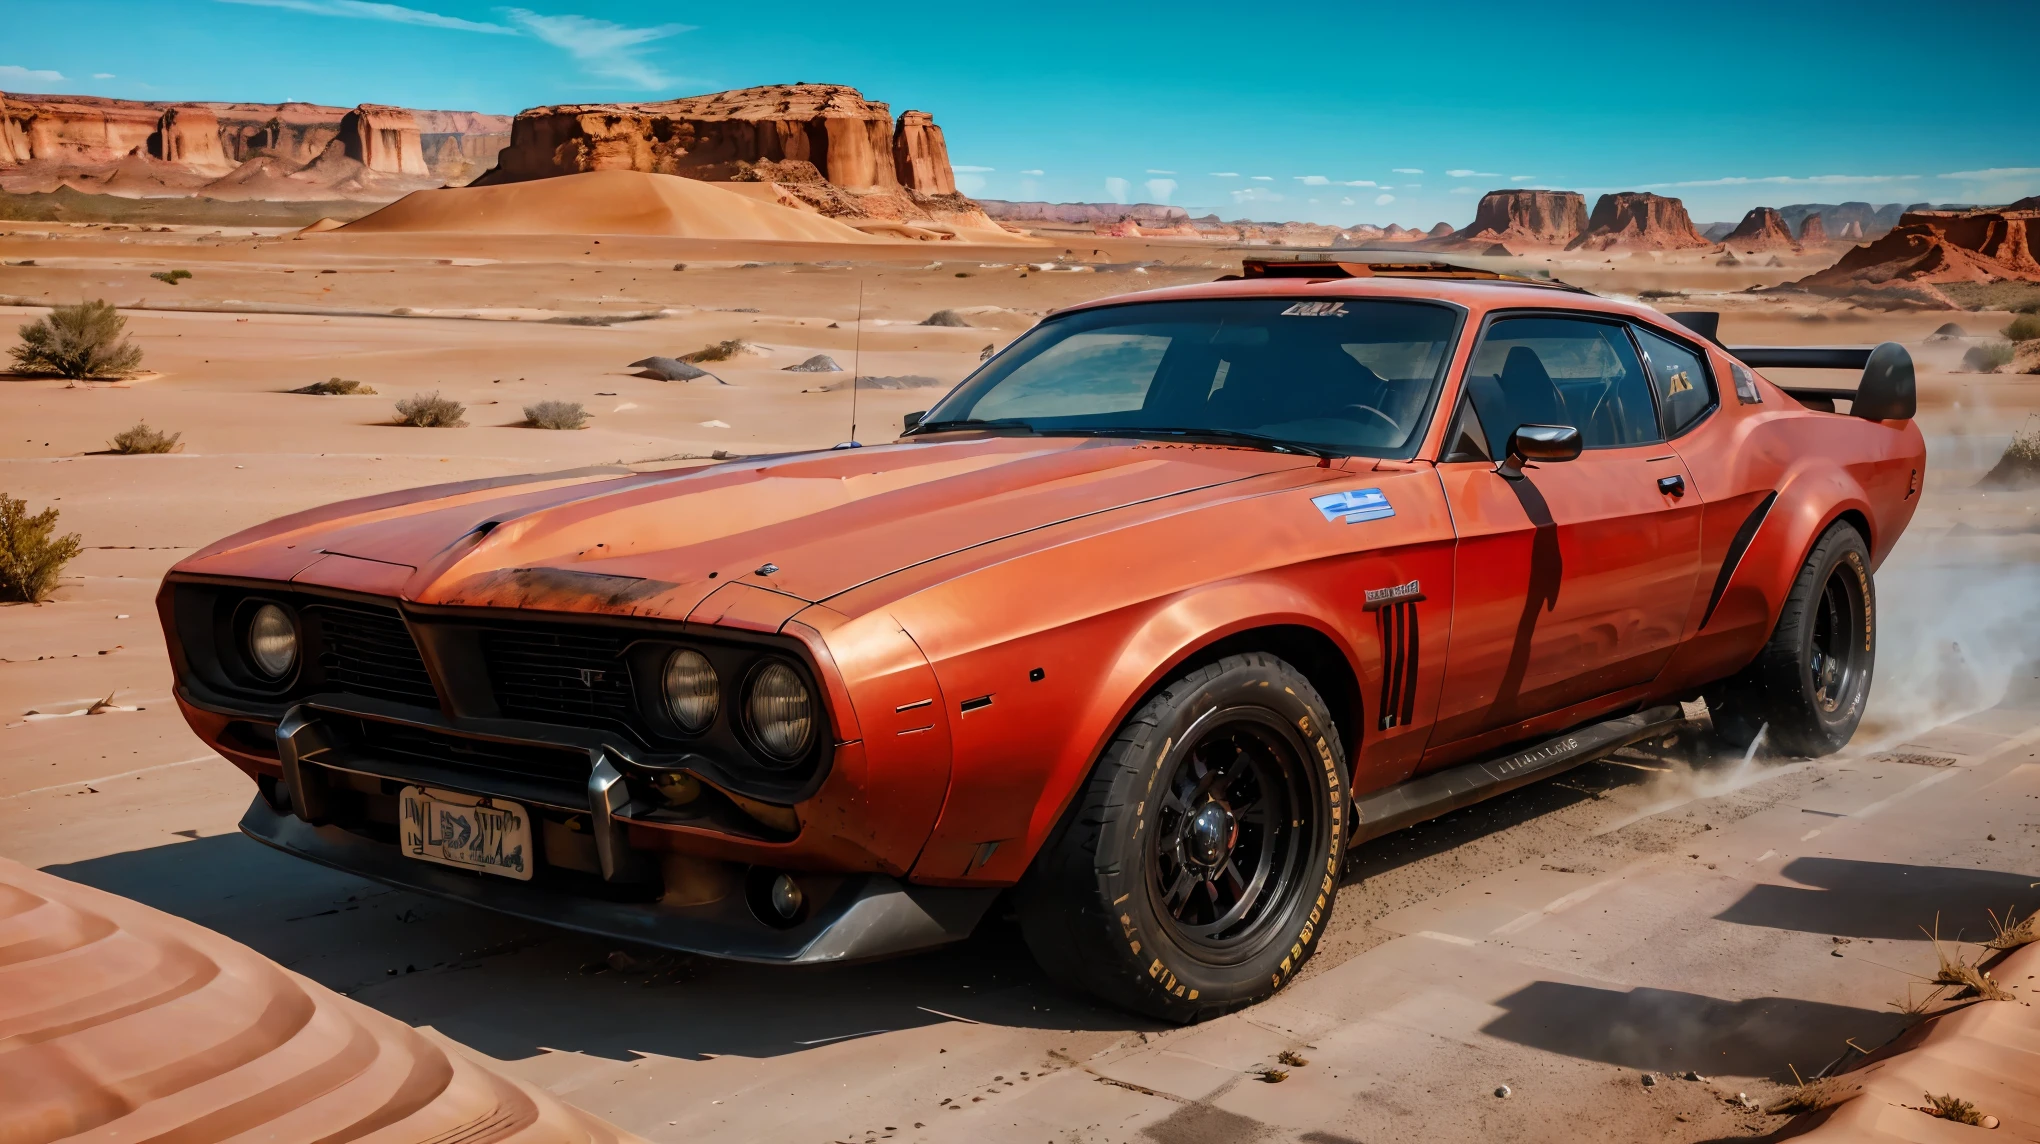 (highest quality:1.2, Very detailed, High Contrast, masterpiece:1.2, Best Quality, Best aesthetics), Mad Max, Ford Falcon XB, ((Black coloring)), V8 Interceptor, supercharger, Equipped with twin overhead cams, A jet-black special pursuit vehicle tuned up to 600 horsepower., Running in the wilderness, Sand Dust, Dynamic Angle, Cinema lighting, Dynamic light and shadow,High resolution, Sharp focus, Speed, Uplifting, Rich colors, beautiful, Correct perspective, background blur taste,